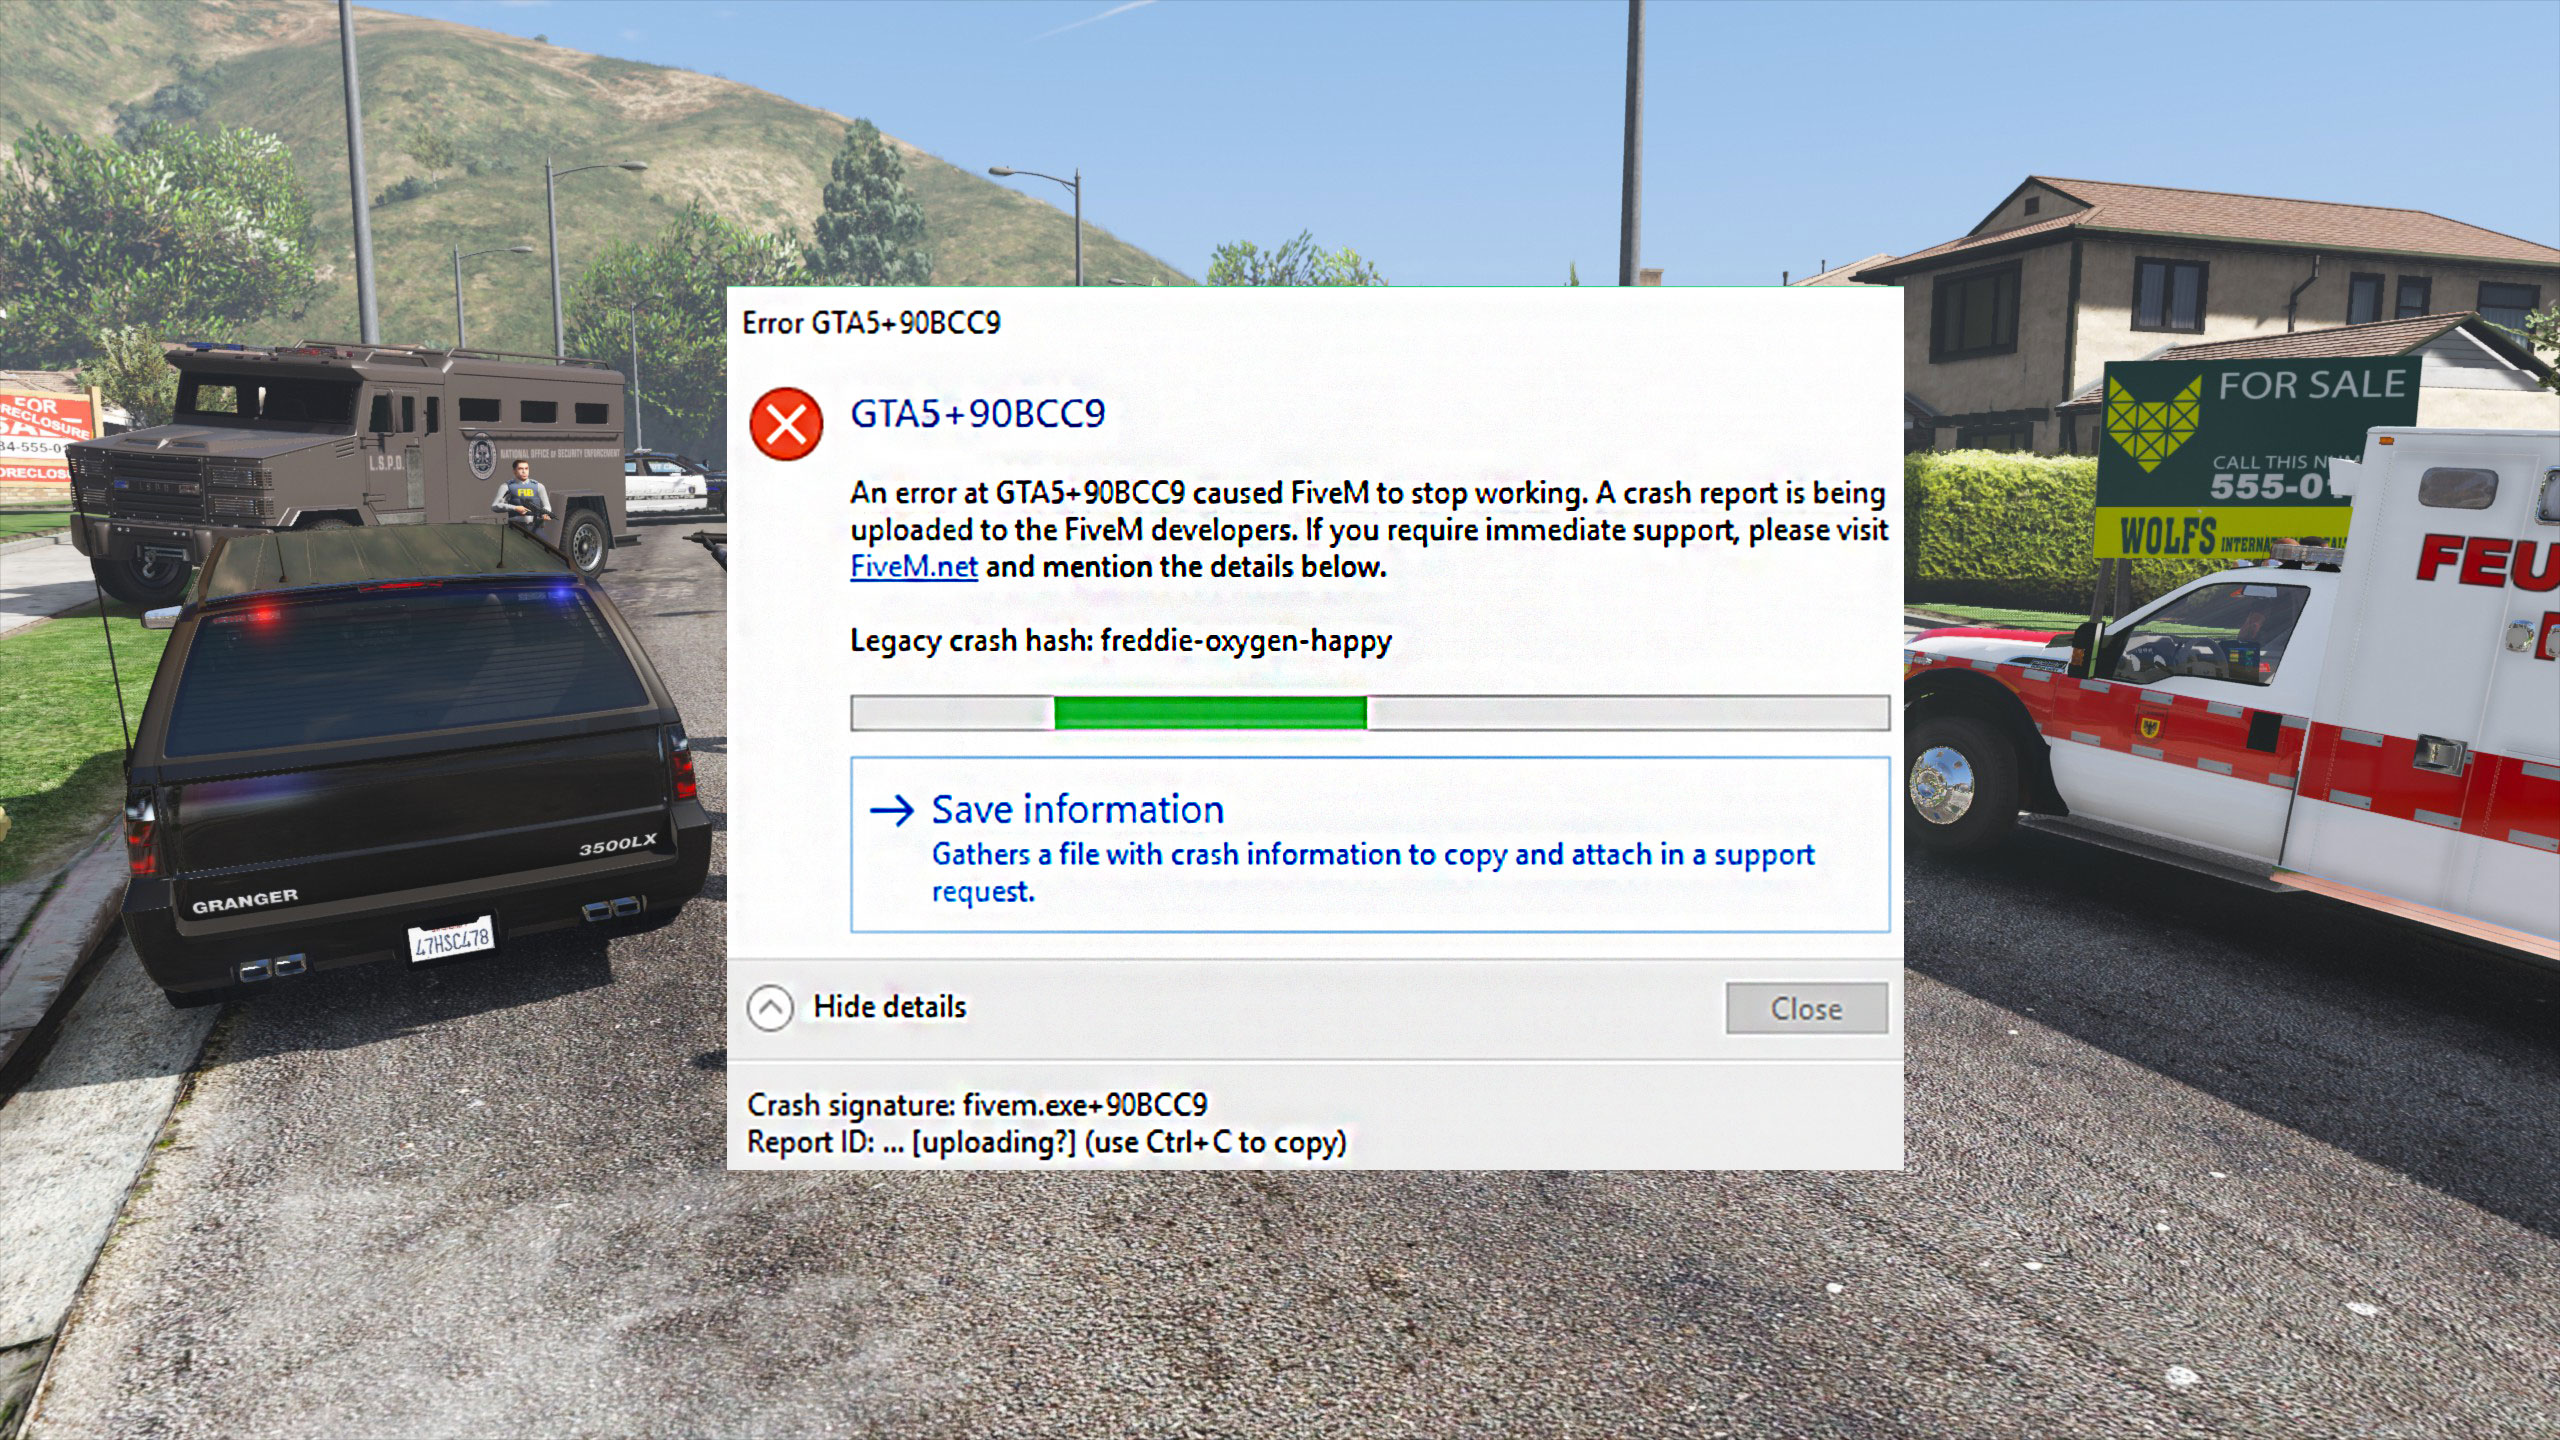 FiveM Crashing issues how to fix it? Games Manuals